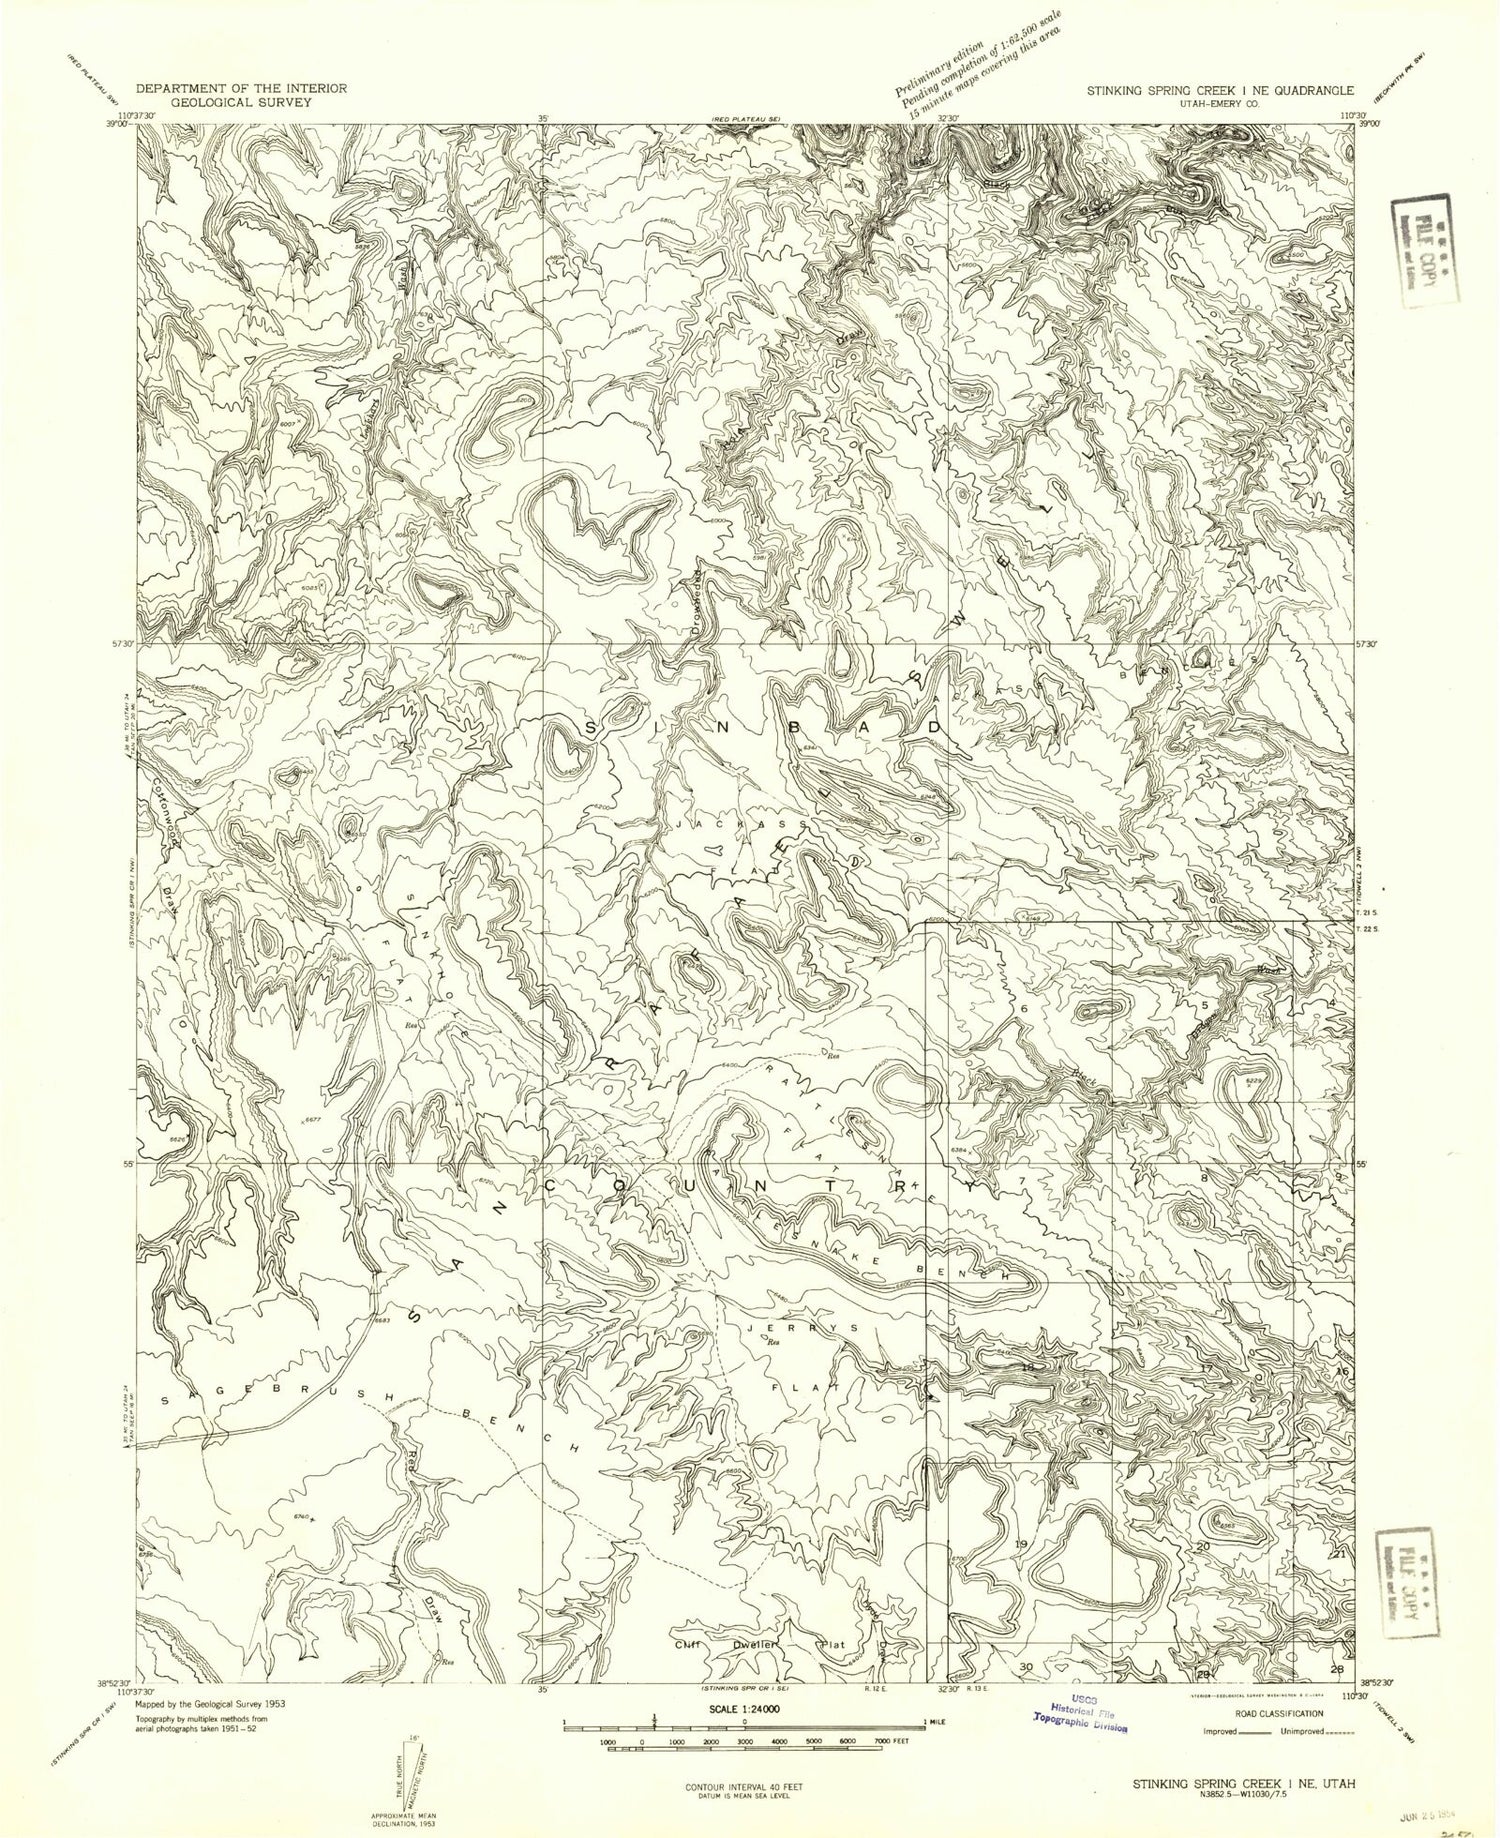 Classic USGS Drowned Hole Draw Utah 7.5'x7.5' Topo Map Image